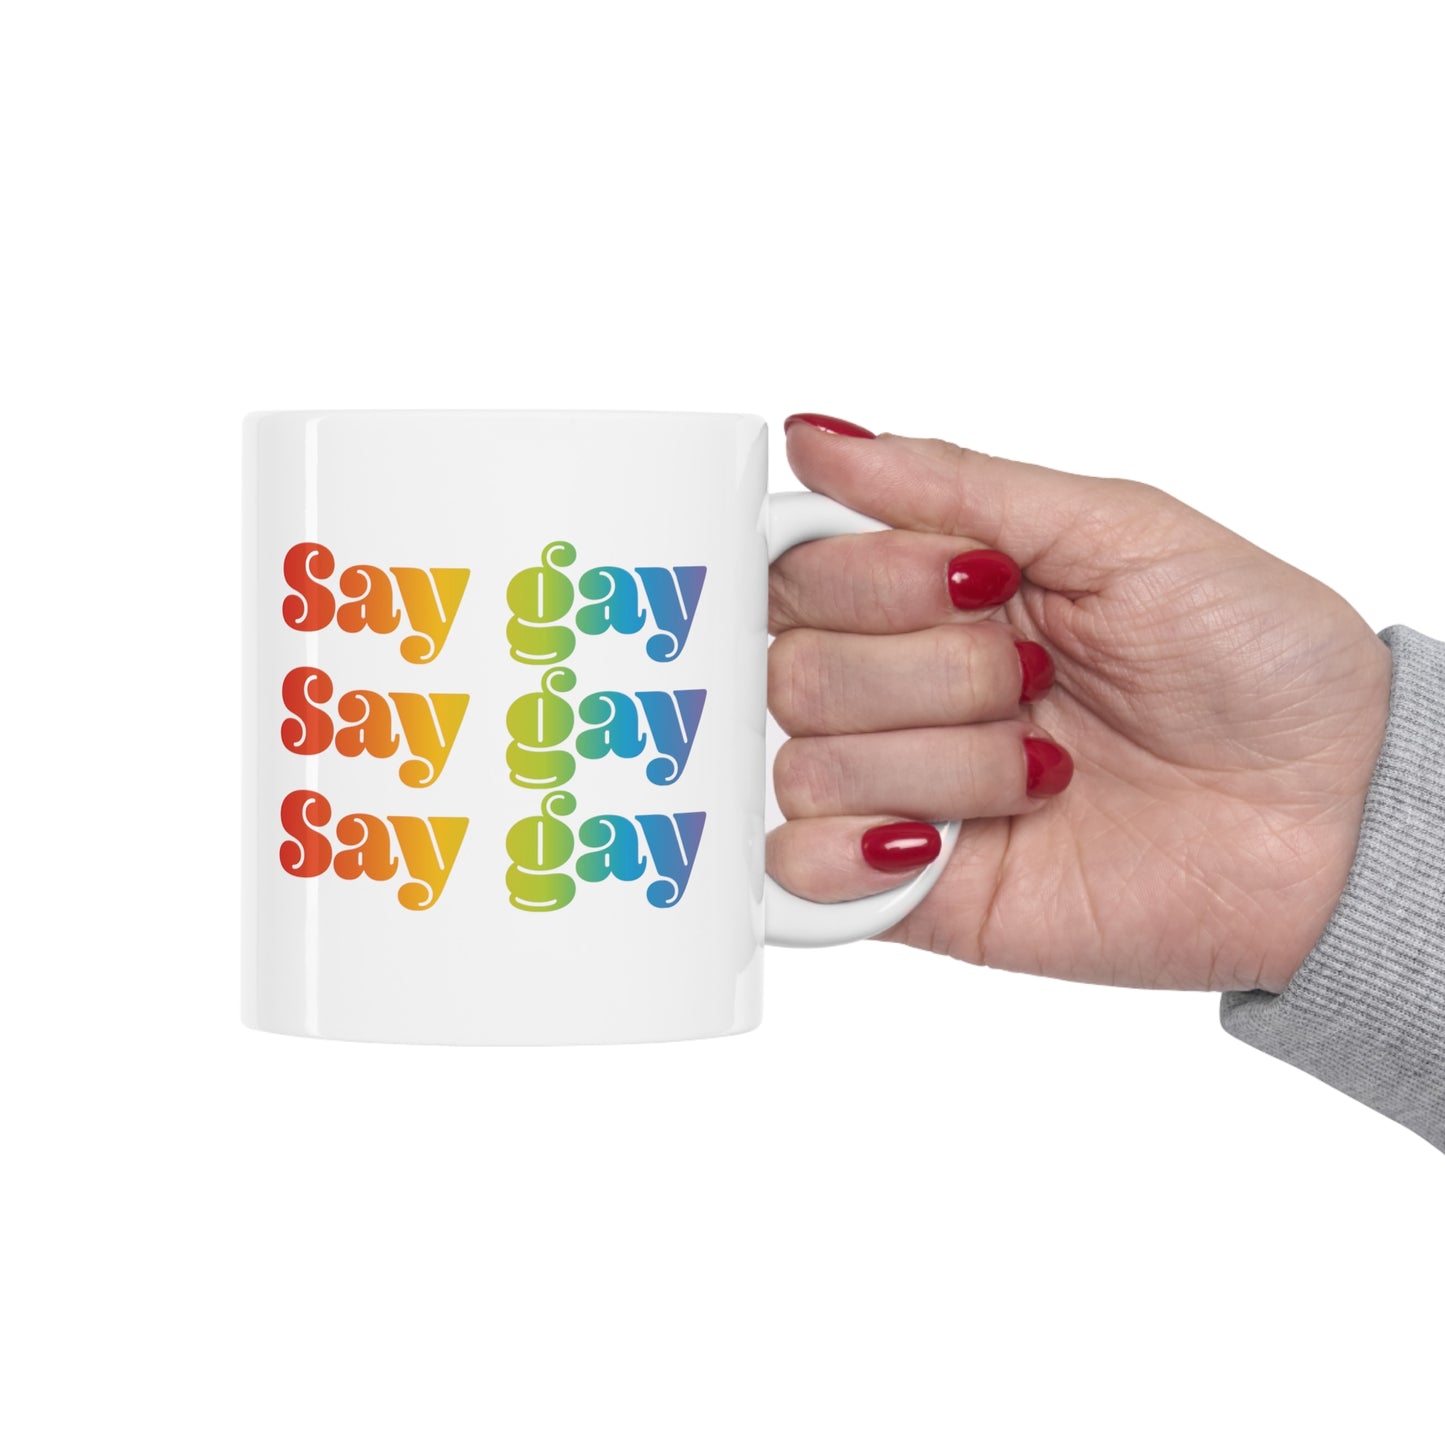 11oz white ceramic mug that reads “Say gay” x3 rows in a thick, rainbow font.